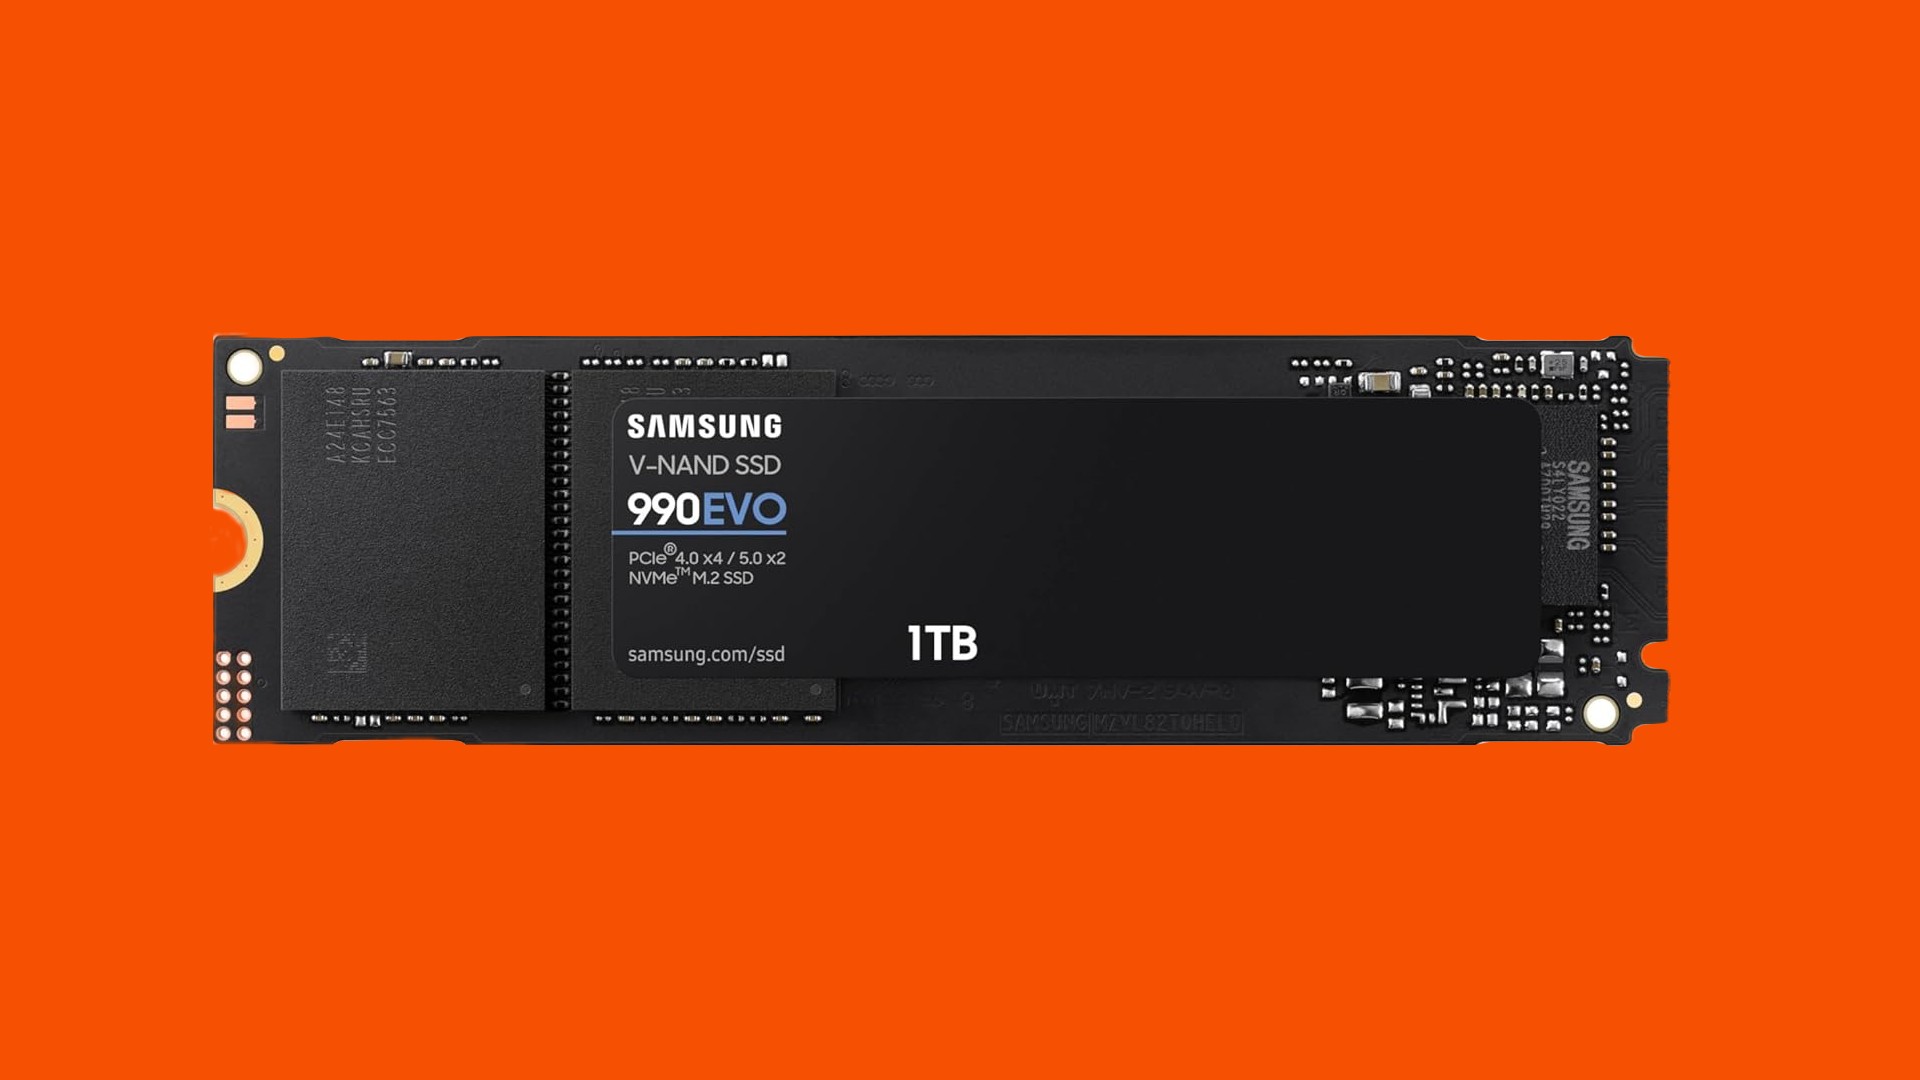 Save $45 on this Samsung gaming SSD, if you're quick